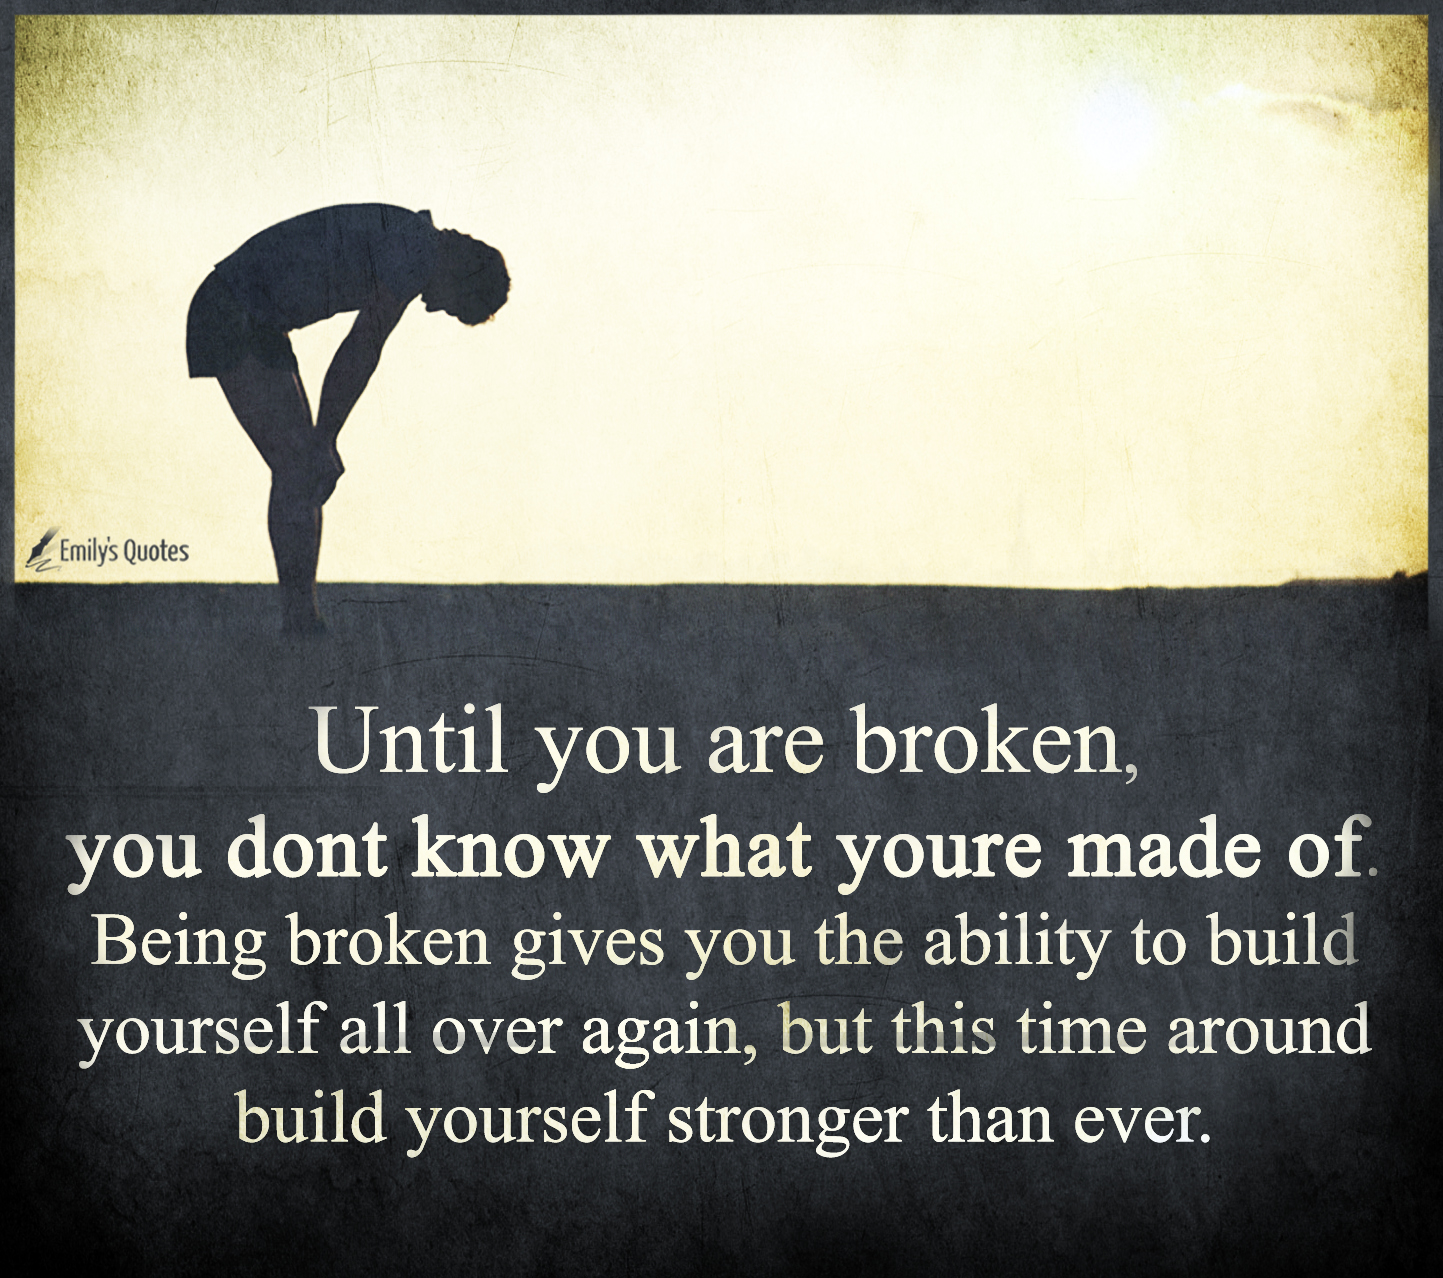 Until you are broken, you don’t know what you’re made of. Being broken gives you